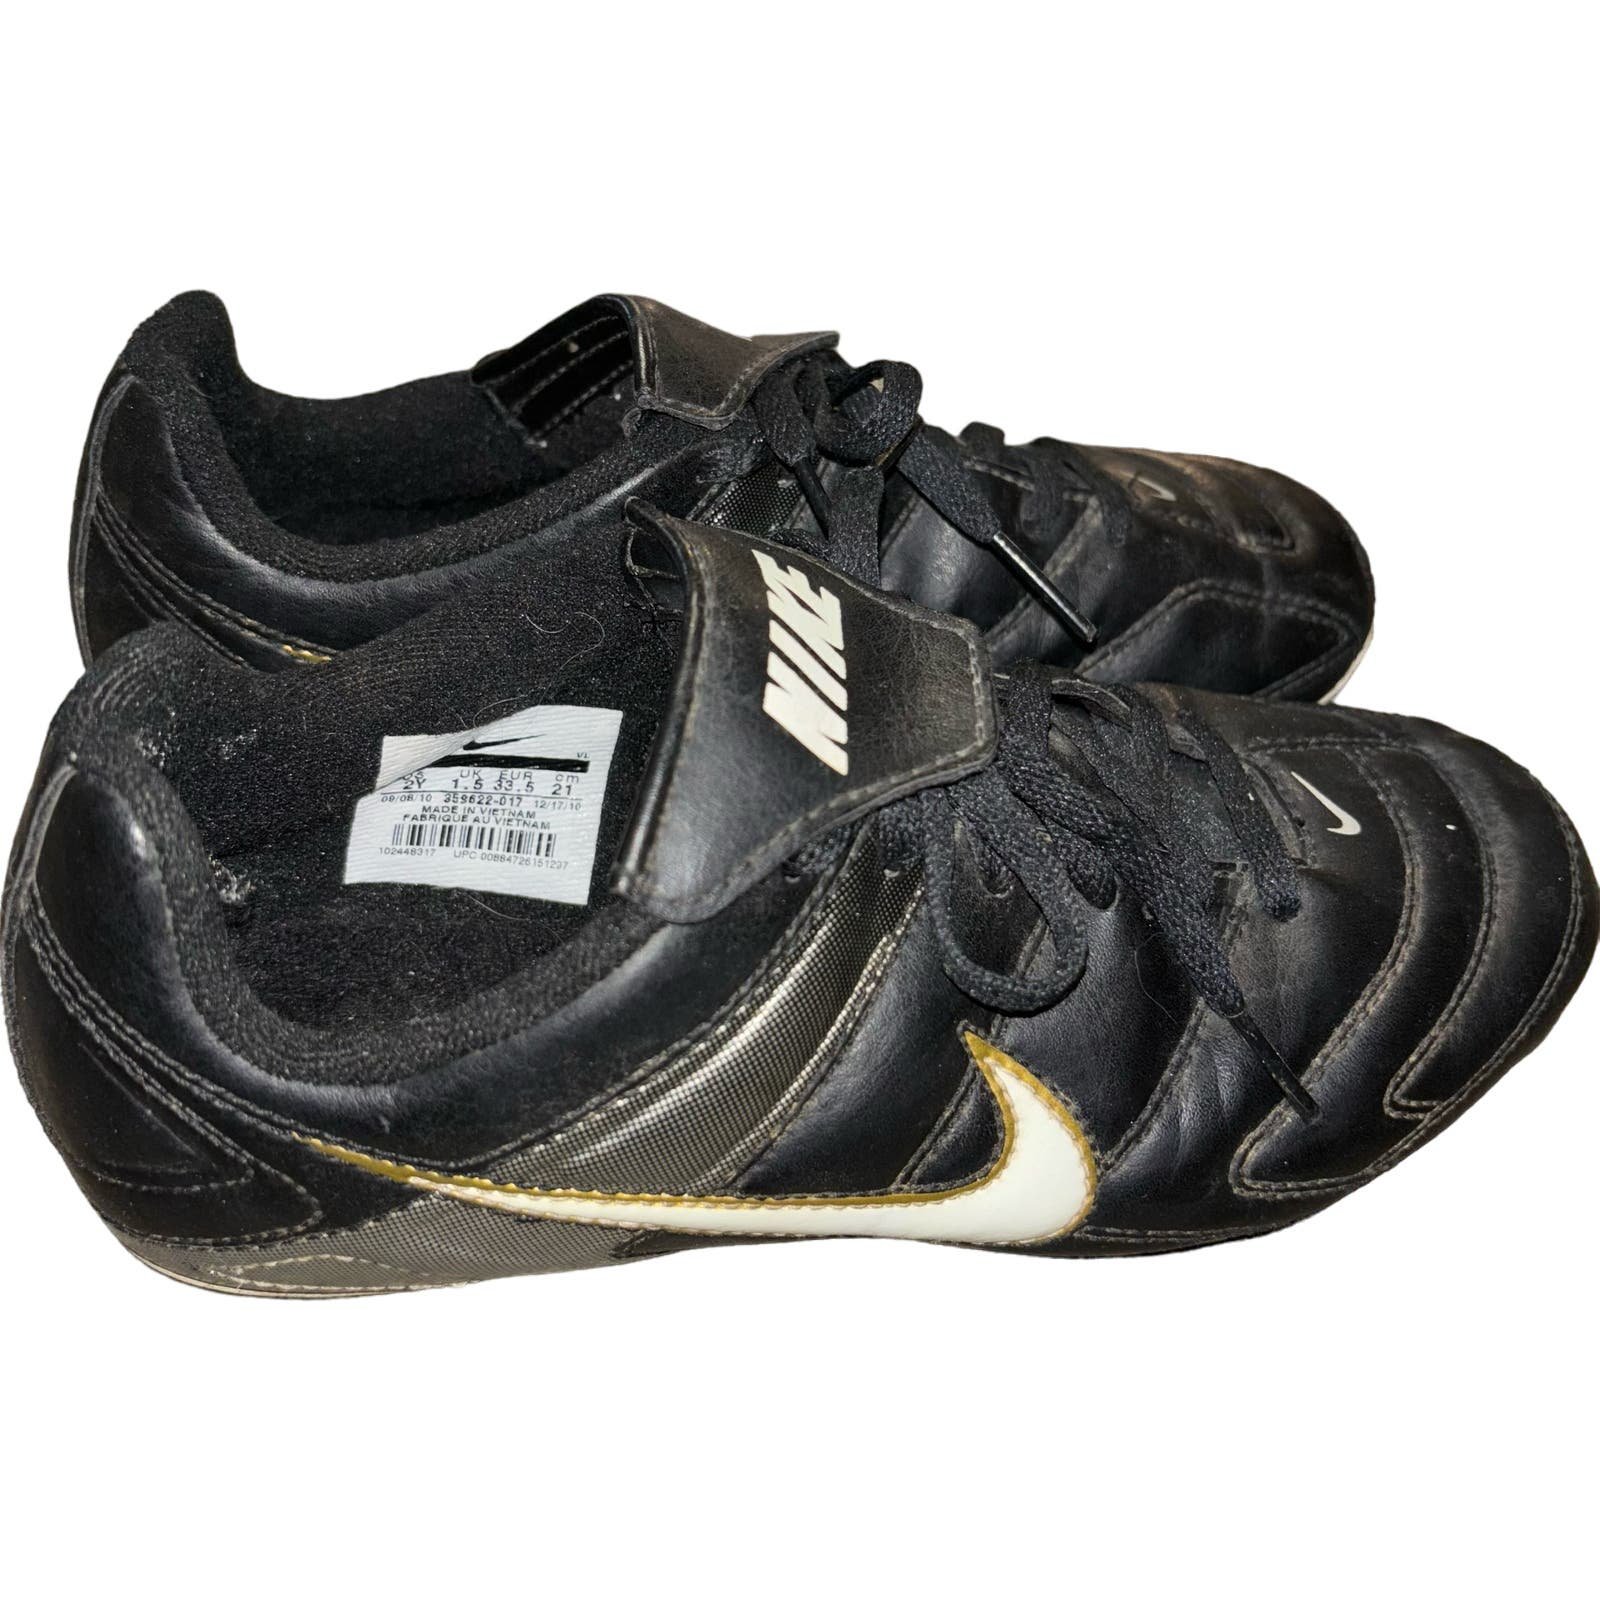 Nike youth cleats black/white/gold (size 2Y) RywpUQTe7